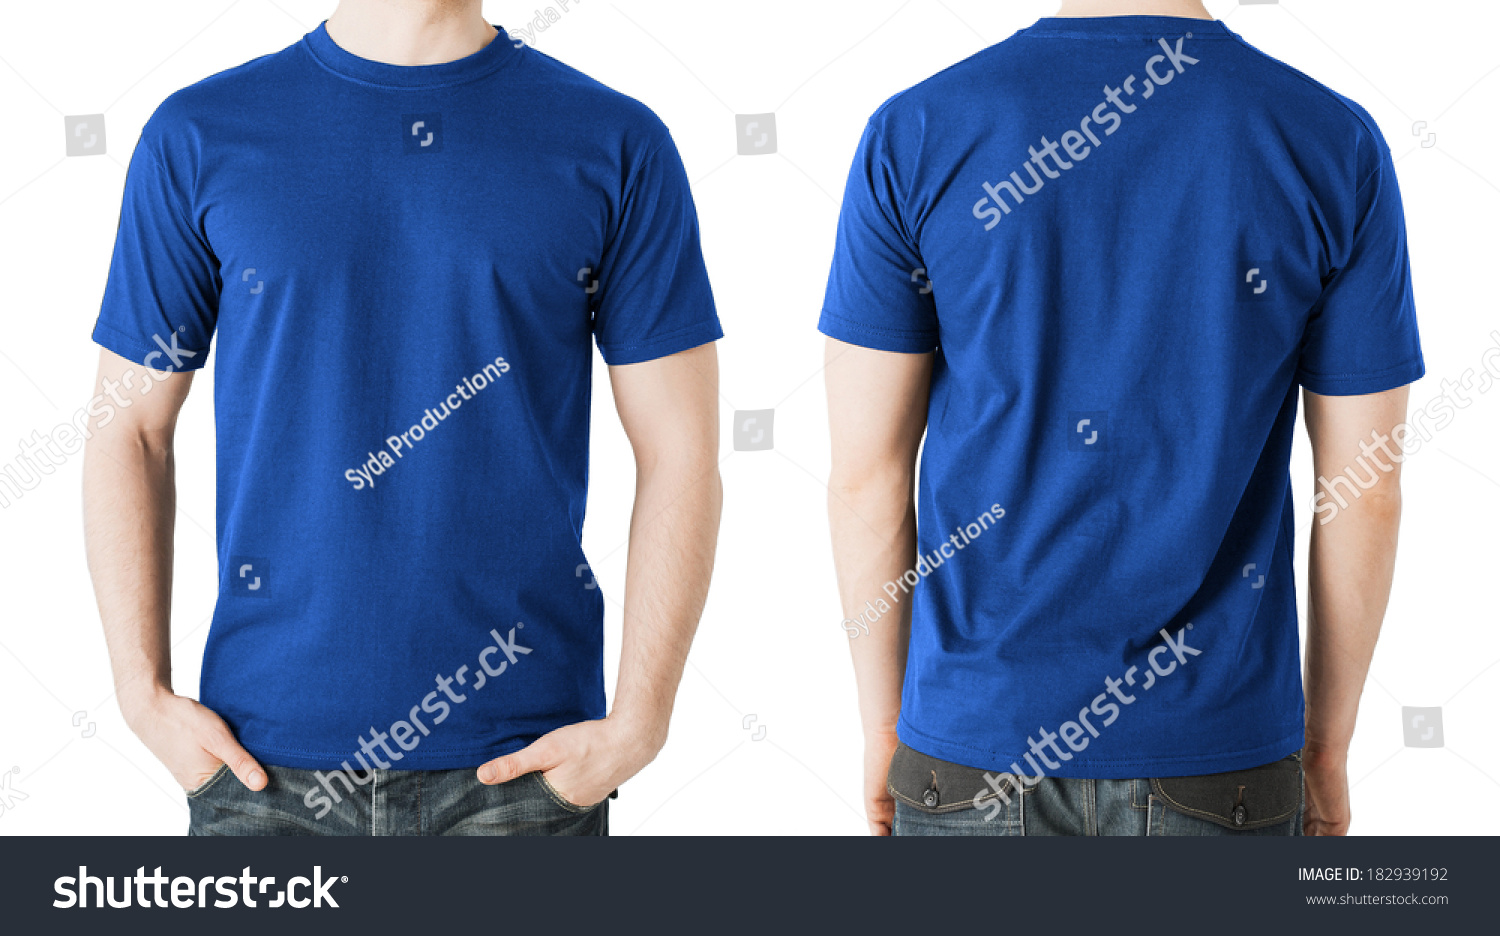 Download Clothing Design Concept Man Blank Blue Stock Photo 182939192 - Shutterstock